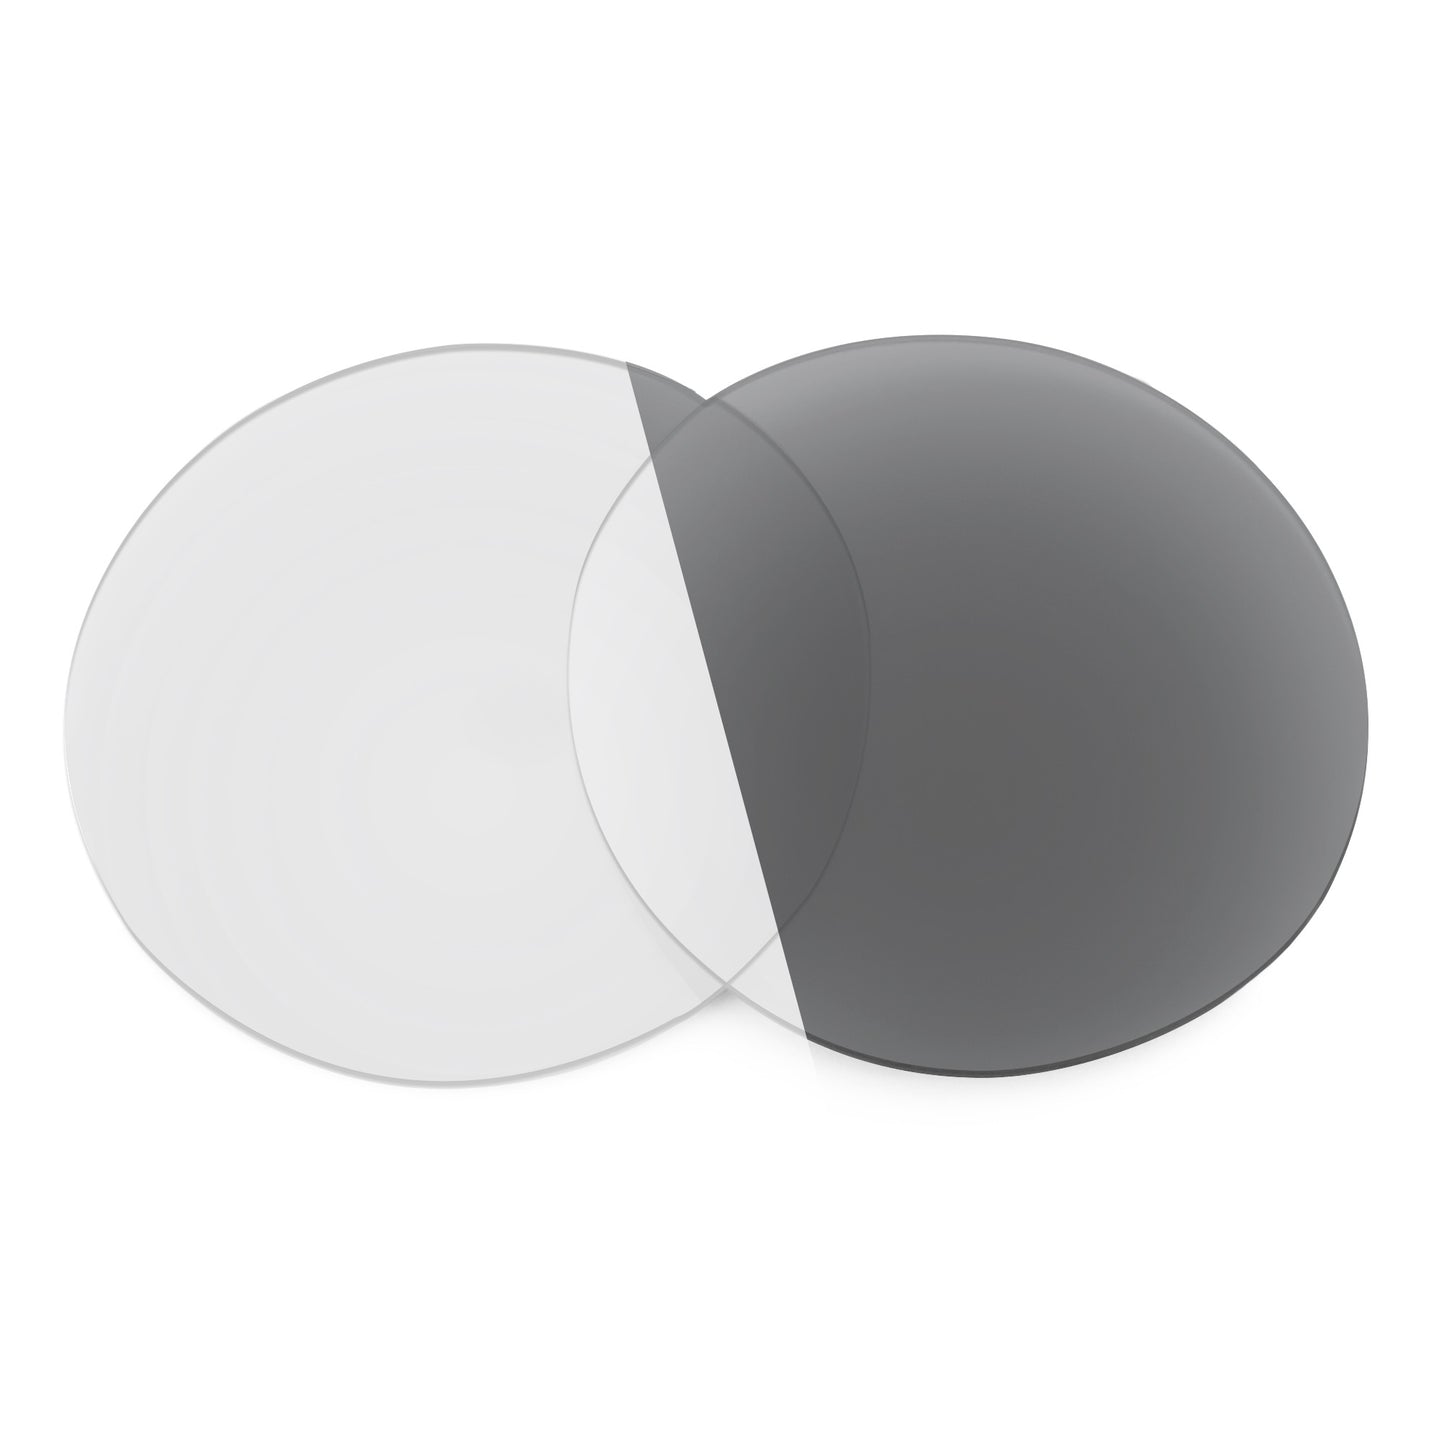 Revant replacement lenses for Ray-Ban RB4253 53mm Non-Polarized Adapt Gray Photochromic